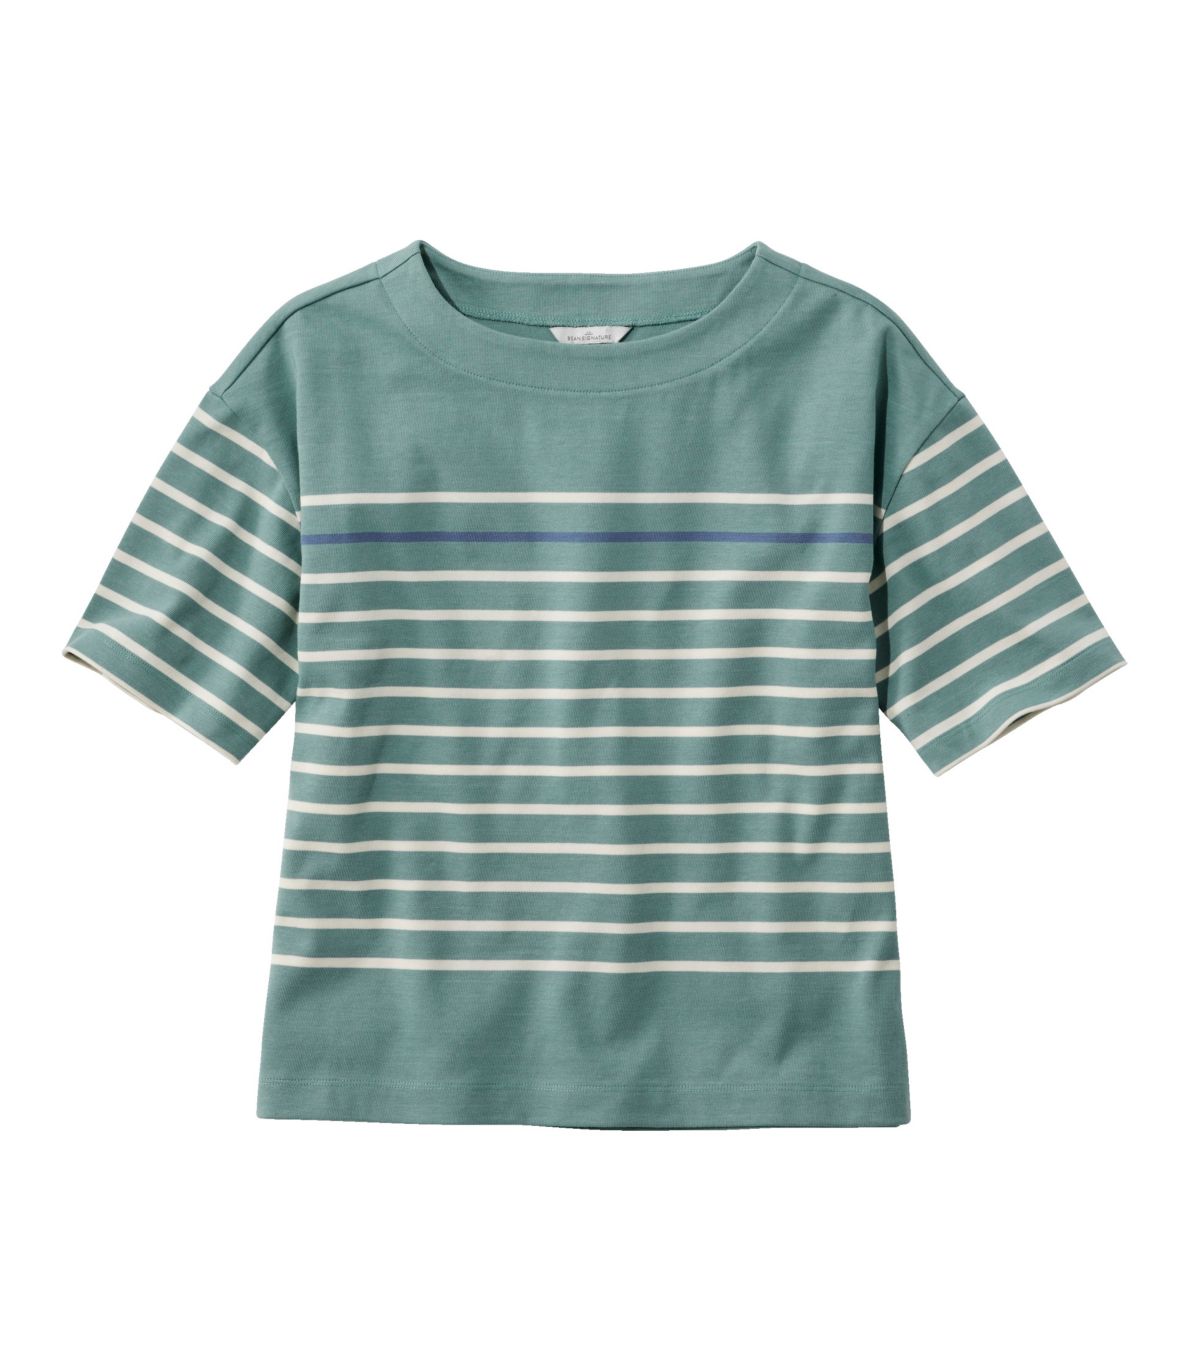 Women's Signature French Sailor Tee